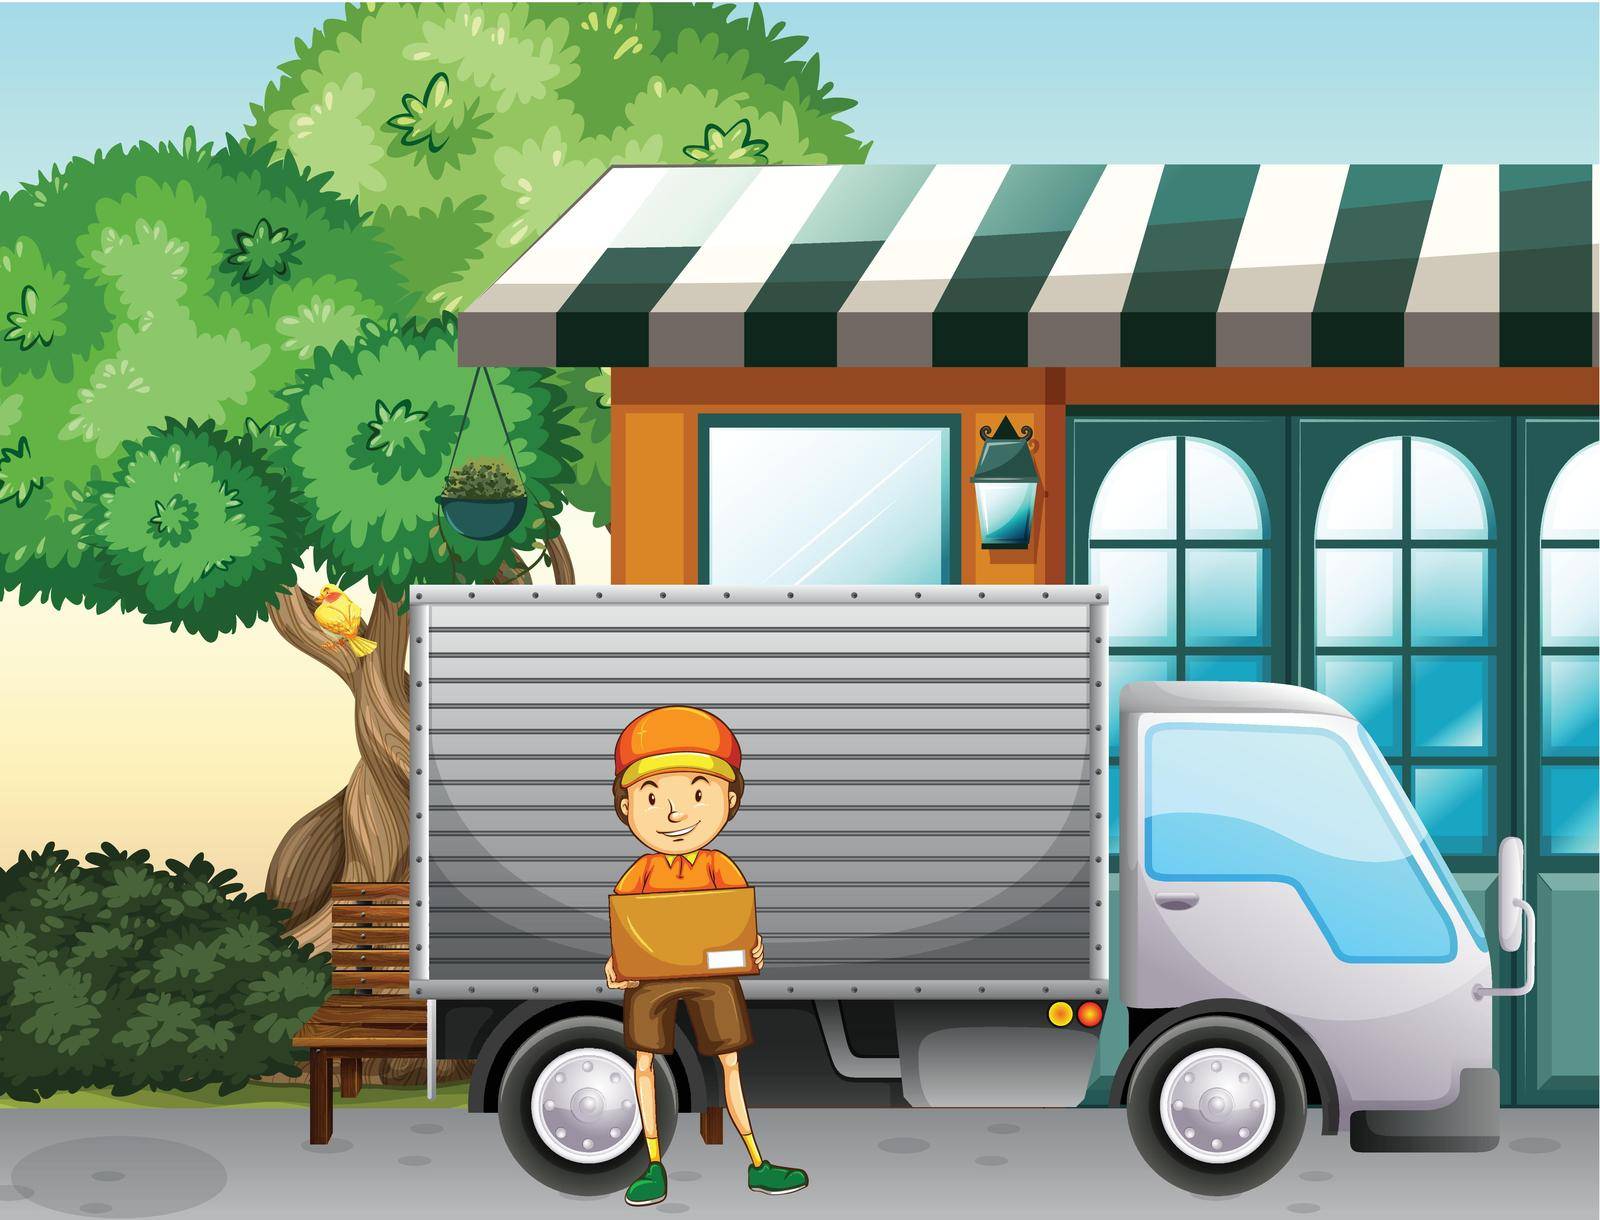 Delivery service man and truck by the shop